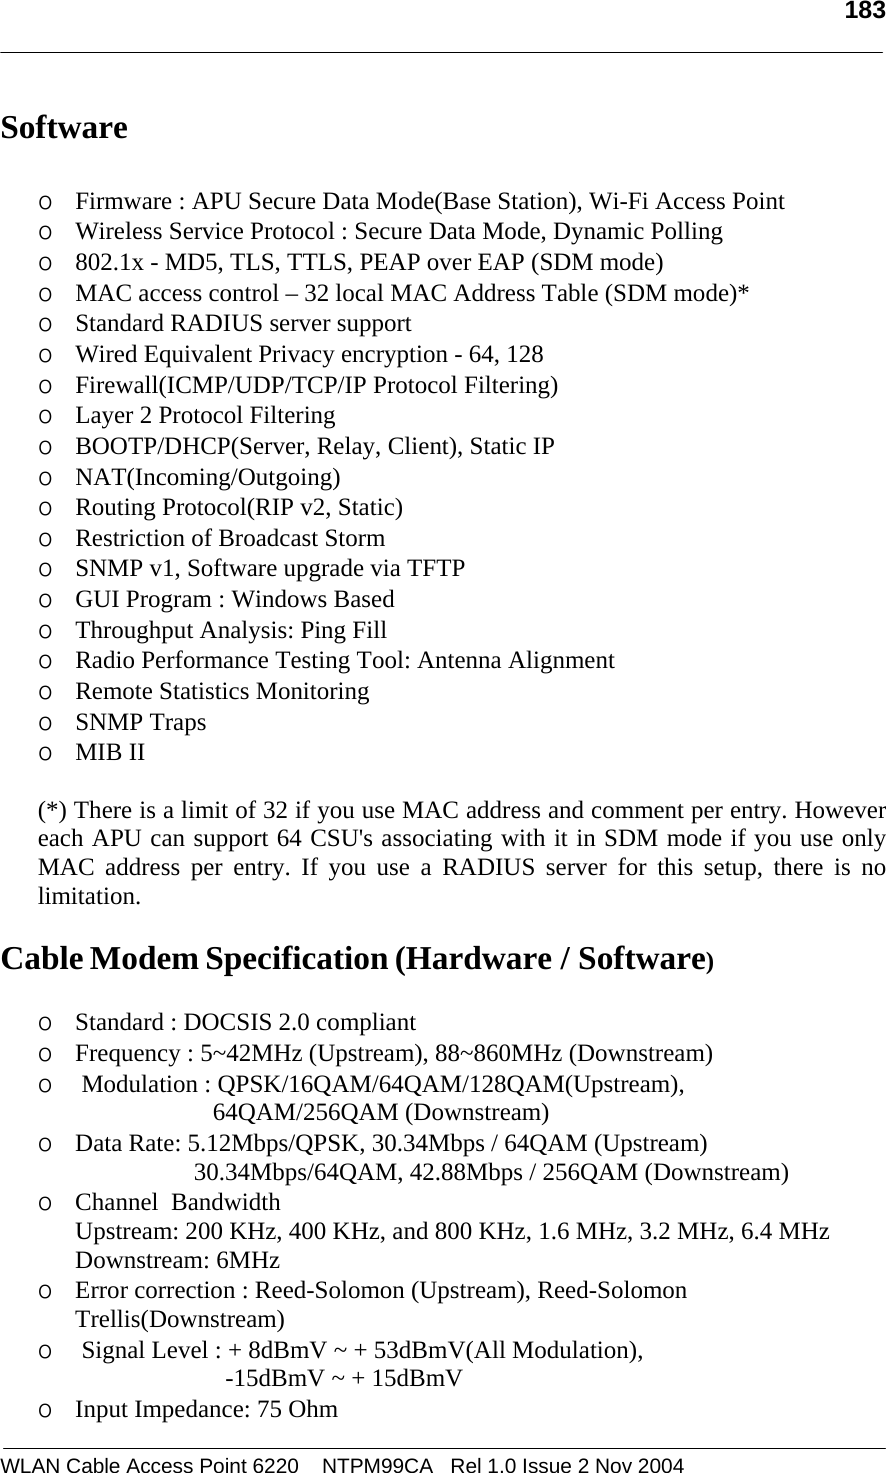   183  WLAN Cable Access Point 6220    NTPM99CA   Rel 1.0 Issue 2 Nov 2004 Software    o Firmware : APU Secure Data Mode(Base Station), Wi-Fi Access Point  o Wireless Service Protocol : Secure Data Mode, Dynamic Polling  o 802.1x - MD5, TLS, TTLS, PEAP over EAP (SDM mode) o MAC access control – 32 local MAC Address Table (SDM mode)*   o Standard RADIUS server support            o Wired Equivalent Privacy encryption - 64, 128 o Firewall(ICMP/UDP/TCP/IP Protocol Filtering) o Layer 2 Protocol Filtering o BOOTP/DHCP(Server, Relay, Client), Static IP  o NAT(Incoming/Outgoing) o Routing Protocol(RIP v2, Static)  o Restriction of Broadcast Storm  o SNMP v1, Software upgrade via TFTP o GUI Program : Windows Based o Throughput Analysis: Ping Fill  o Radio Performance Testing Tool: Antenna Alignment o Remote Statistics Monitoring o SNMP Traps o MIB II   (*) There is a limit of 32 if you use MAC address and comment per entry. However each APU can support 64 CSU&apos;s associating with it in SDM mode if you use only MAC address per entry. If you use a RADIUS server for this setup, there is no limitation.  Cable Modem Specification (Hardware / Software)  o Standard : DOCSIS 2.0 compliant o Frequency : 5~42MHz (Upstream), 88~860MHz (Downstream) o  Modulation : QPSK/16QAM/64QAM/128QAM(Upstream),                                     64QAM/256QAM (Downstream) o Data Rate: 5.12Mbps/QPSK, 30.34Mbps / 64QAM (Upstream)                        30.34Mbps/64QAM, 42.88Mbps / 256QAM (Downstream) o Channel  Bandwidth  Upstream: 200 KHz, 400 KHz, and 800 KHz, 1.6 MHz, 3.2 MHz, 6.4 MHz  Downstream: 6MHz o Error correction : Reed-Solomon (Upstream), Reed-Solomon Trellis(Downstream) o  Signal Level : + 8dBmV ~ + 53dBmV(All Modulation),                                -15dBmV ~ + 15dBmV o Input Impedance: 75 Ohm 